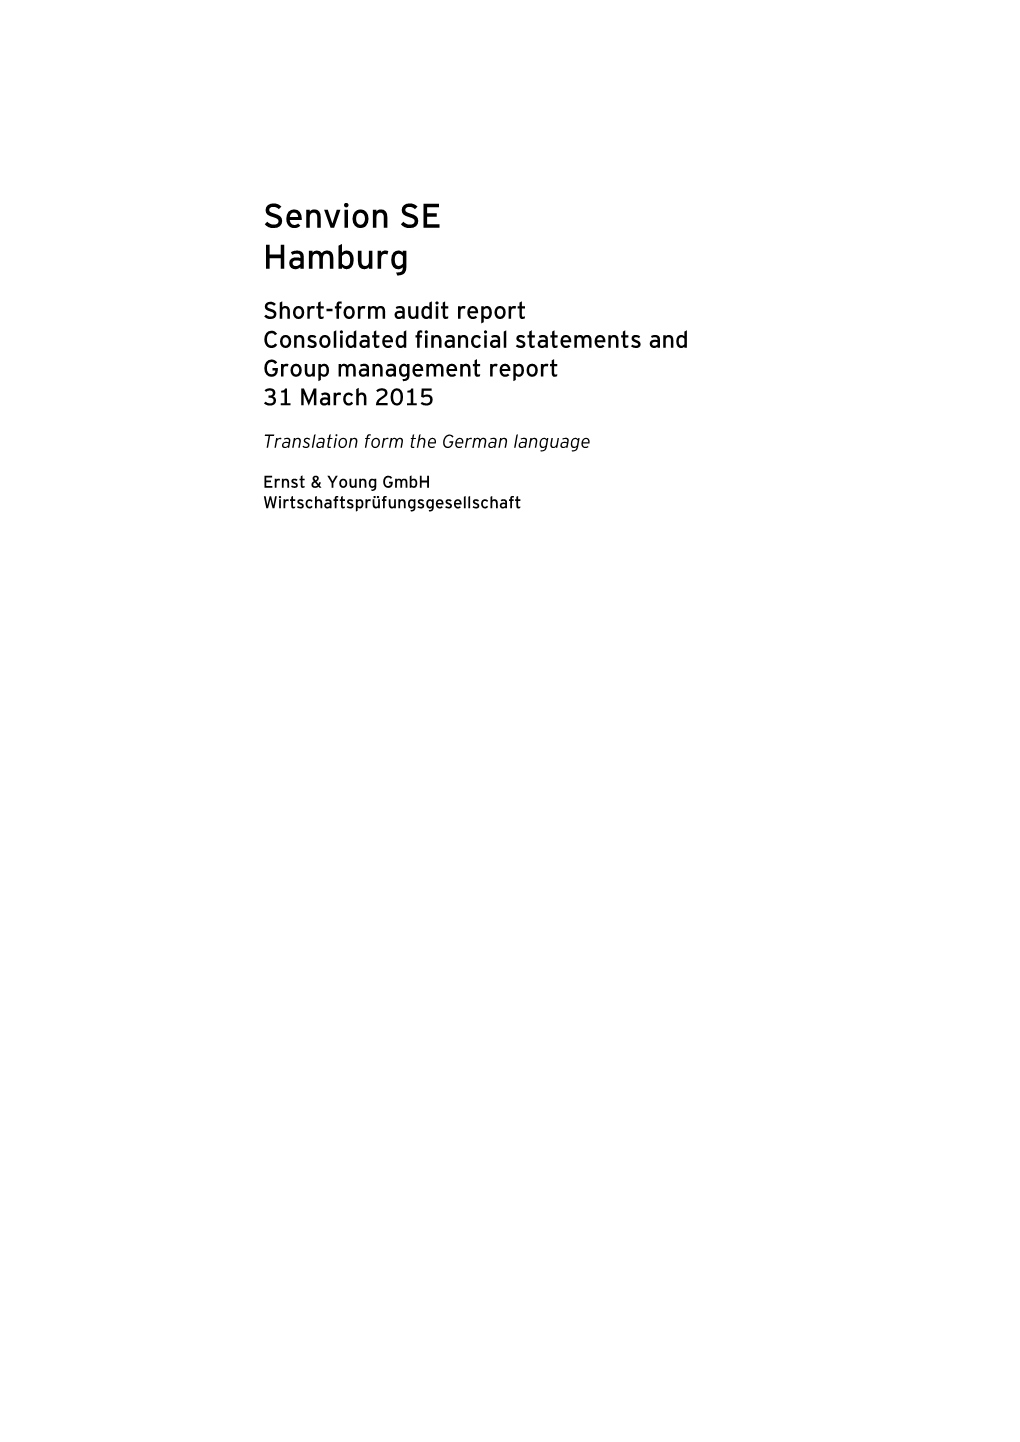 Senvion SE Hamburg Short-Form Audit Report Consolidated Financial Statements and Group Management Report 31 March 2015